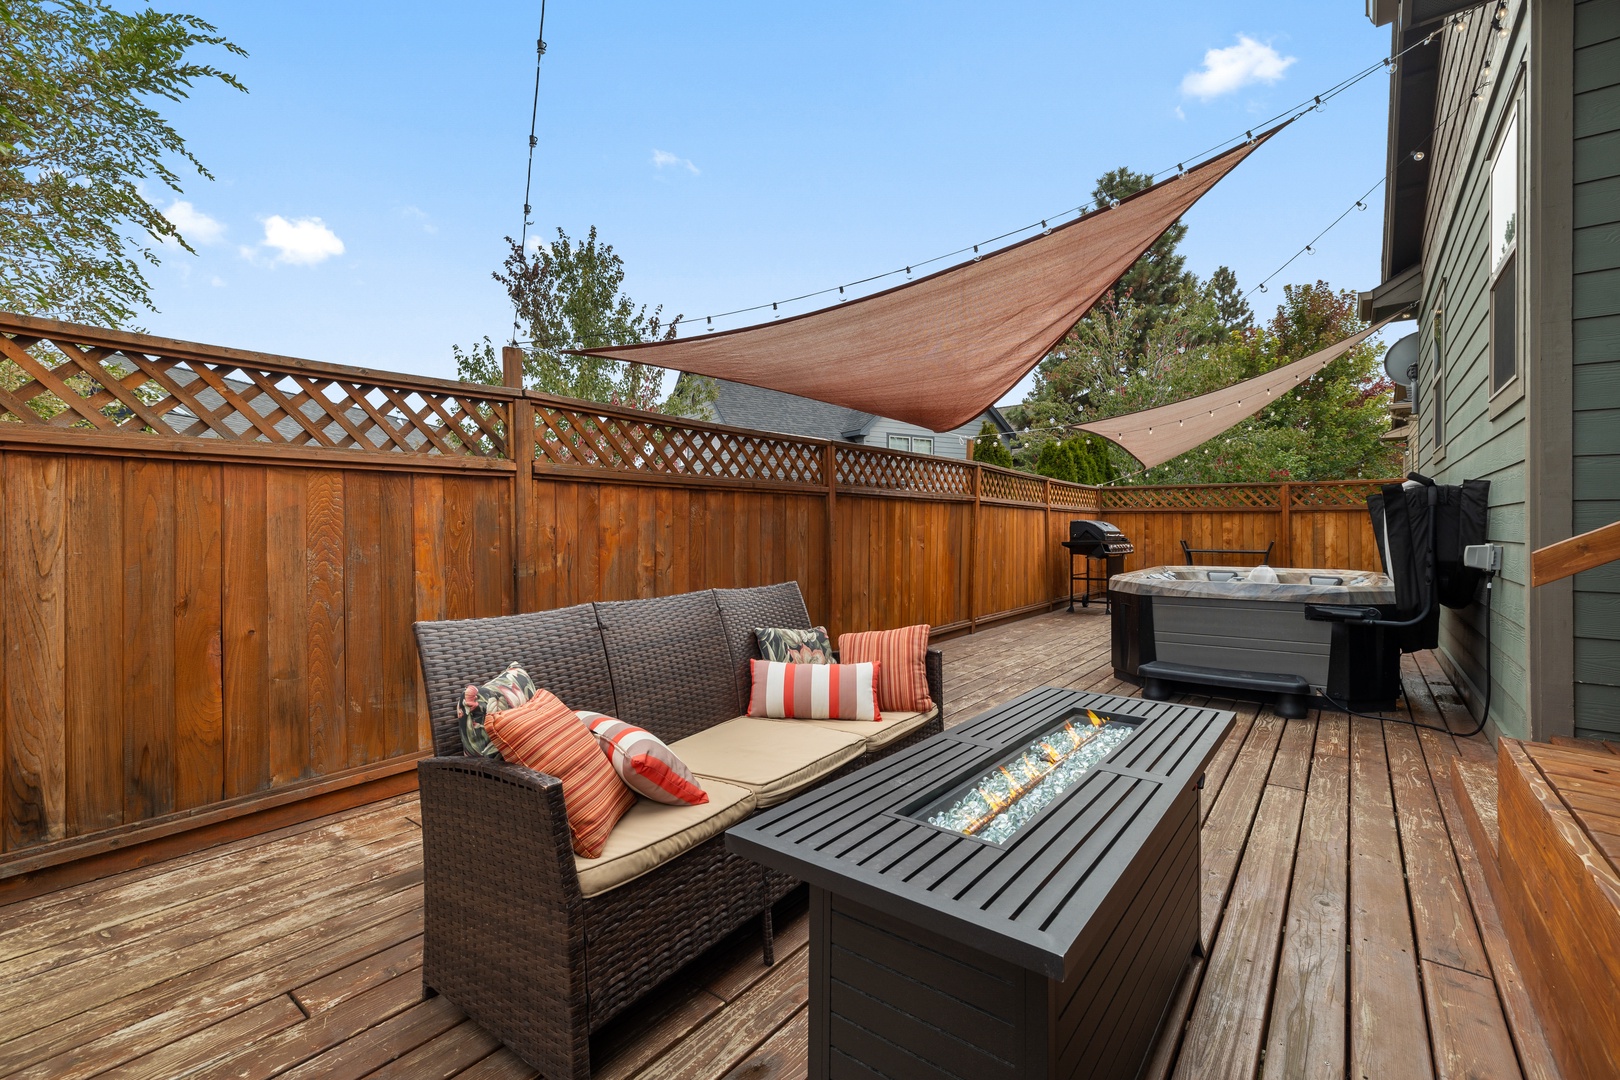 Unwind at the fire table on the back deck & make memories together